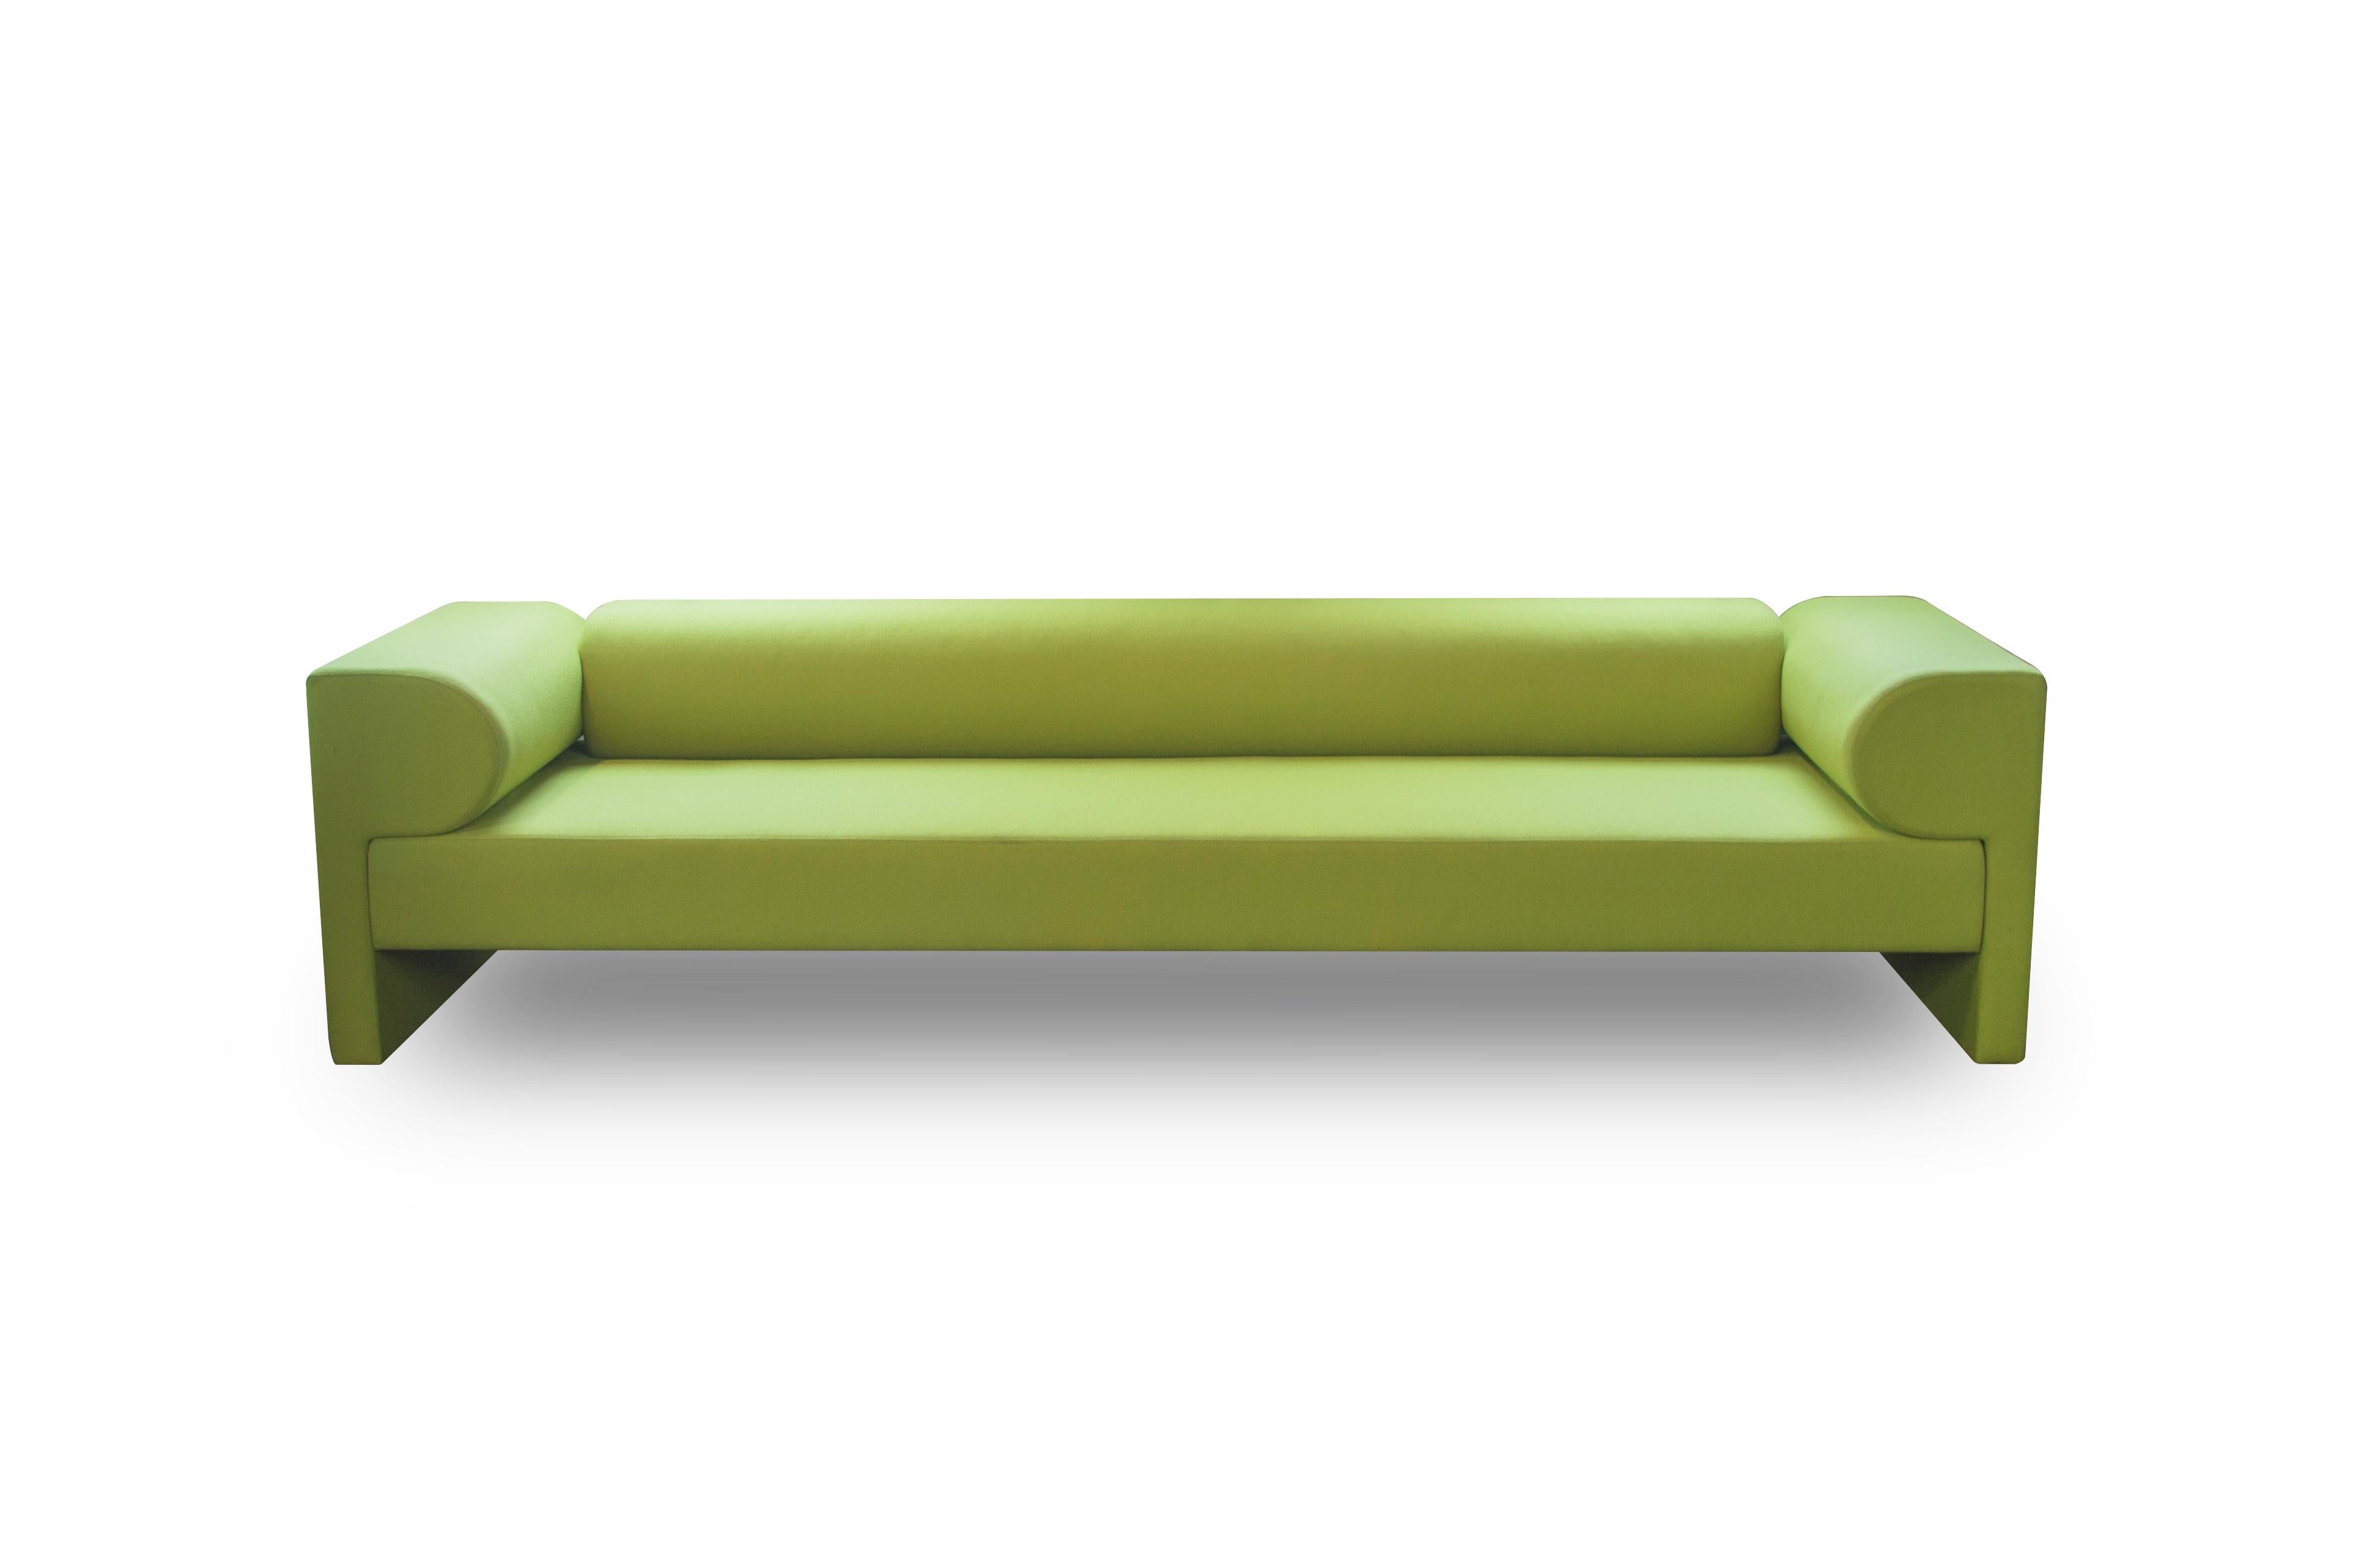 Other Yellow Say Sofa by Gentner Design